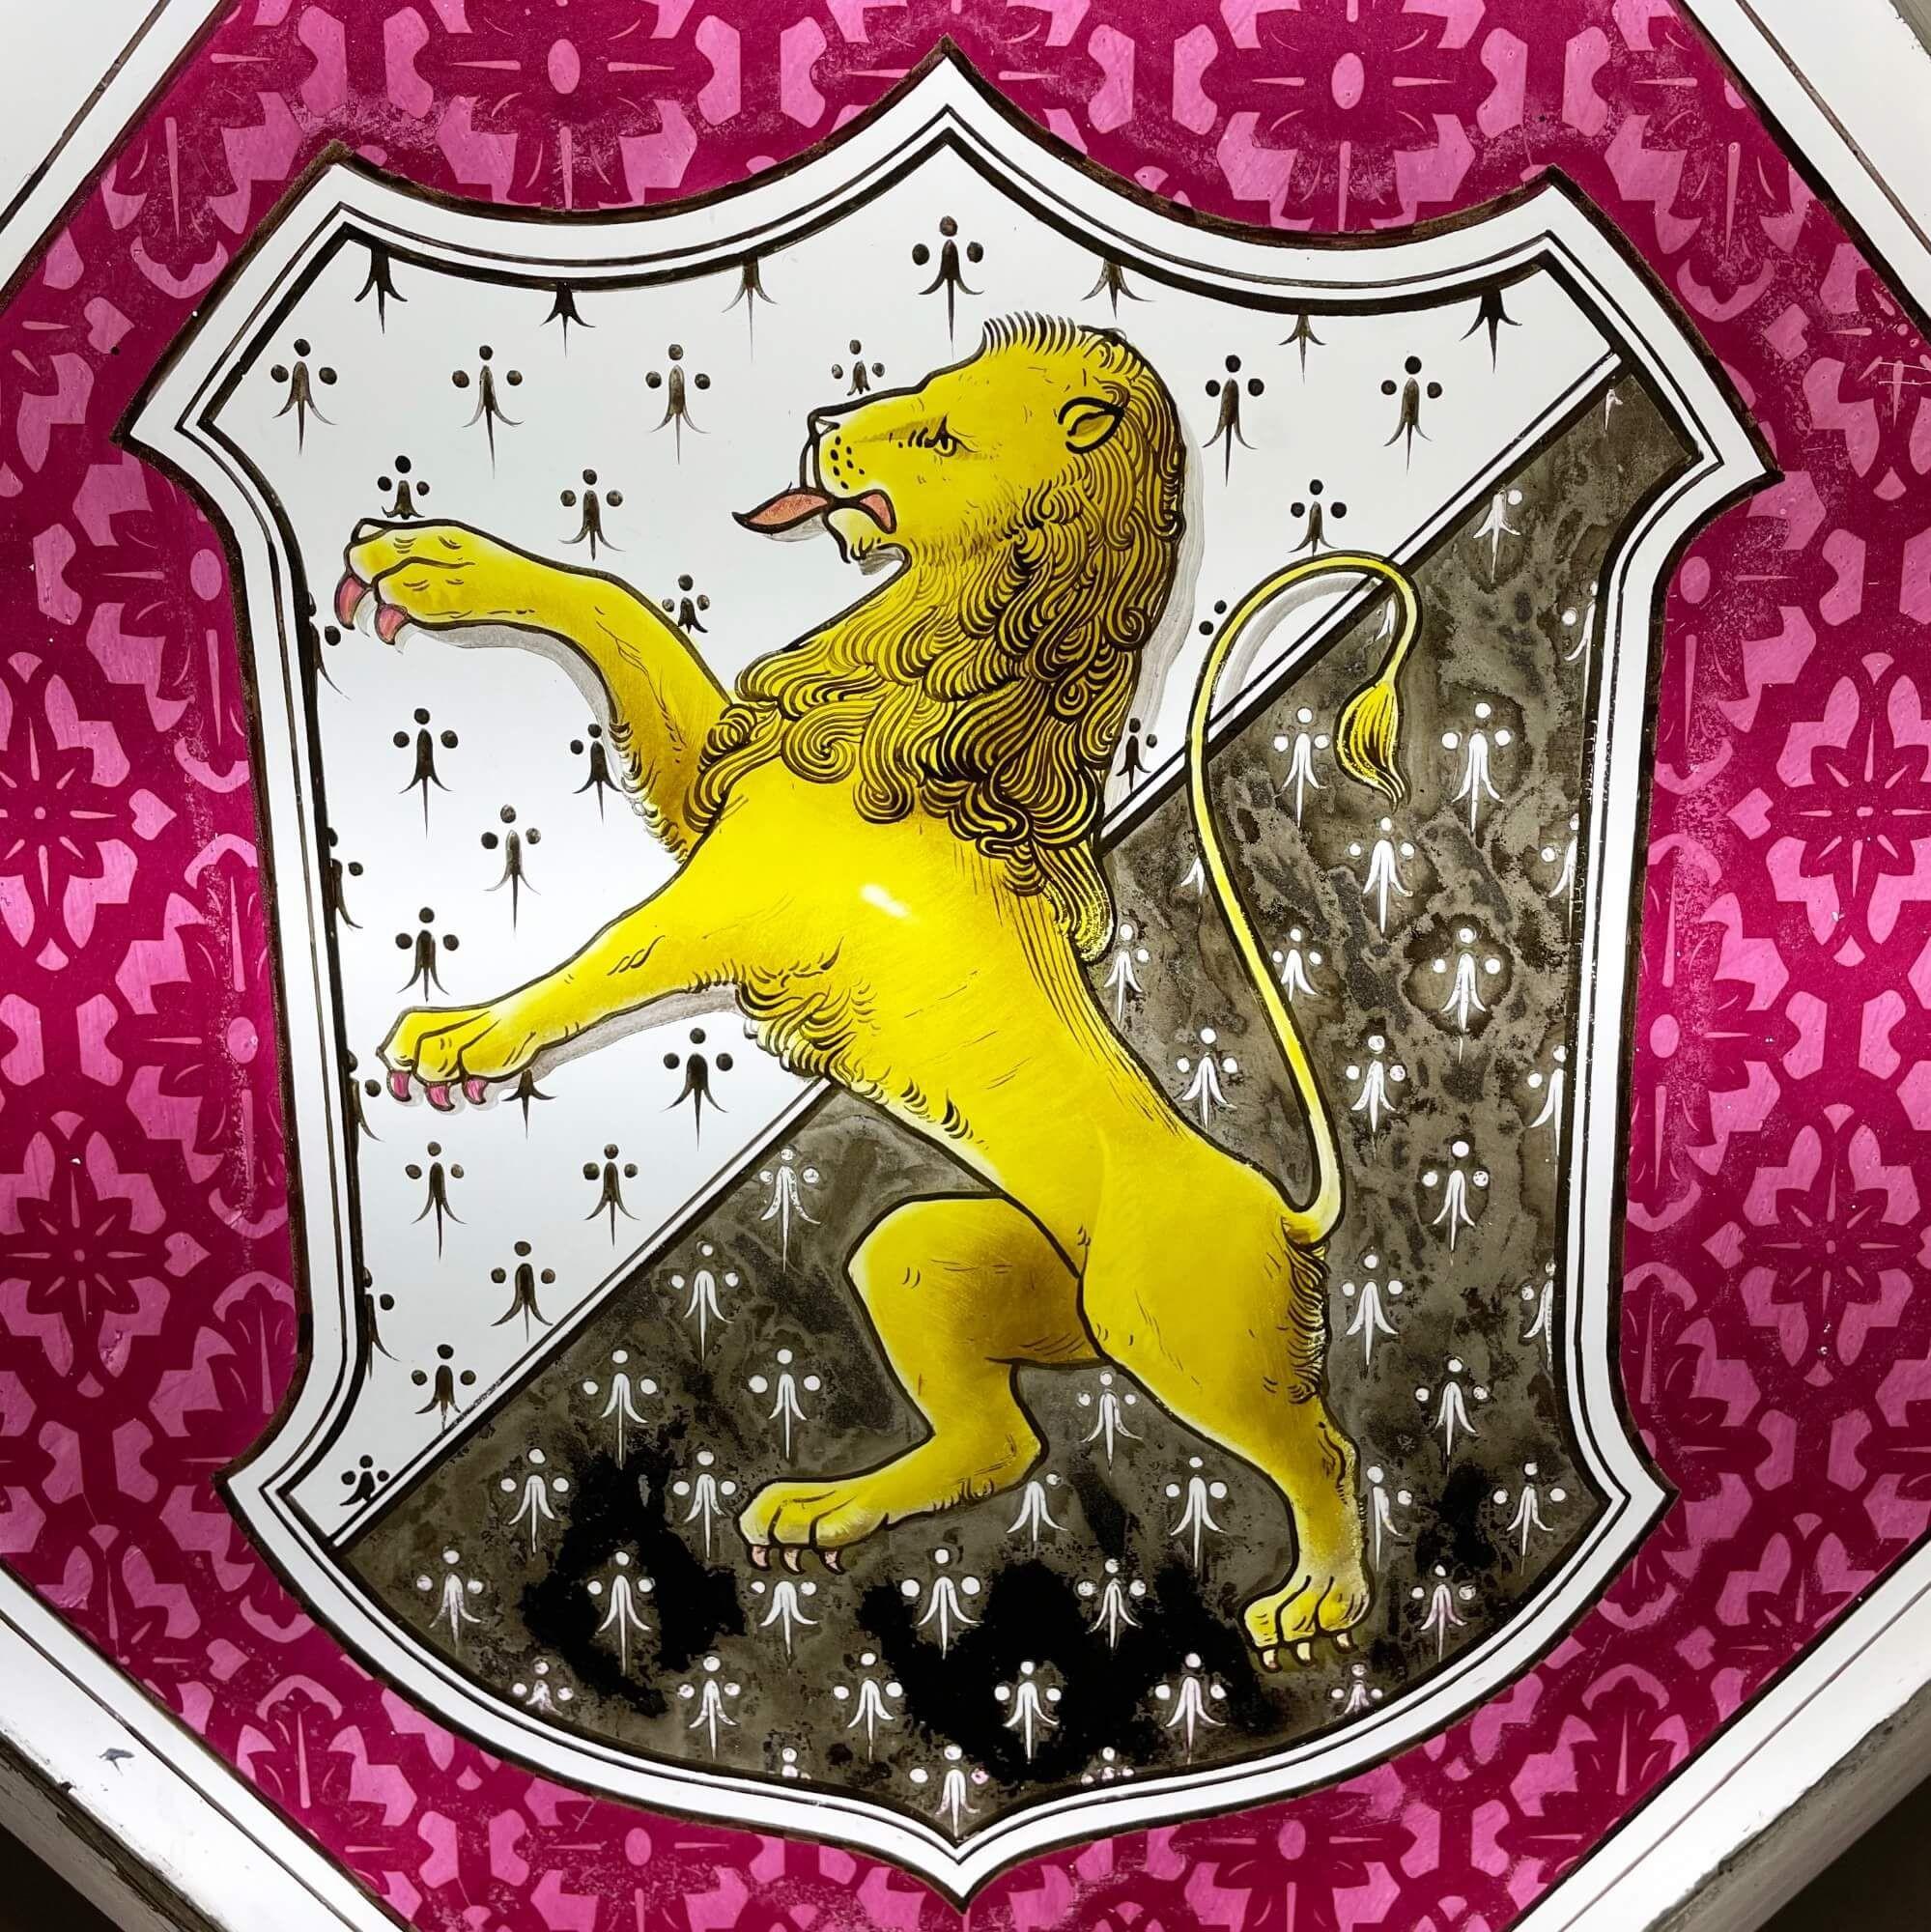 A large antique stained glass window detailed with the armorial crest of the Welsh family of Tudor Trefor, one of a series of 3 we are selling in the same style. At more than a metre square, this window is an impressive piece and features four